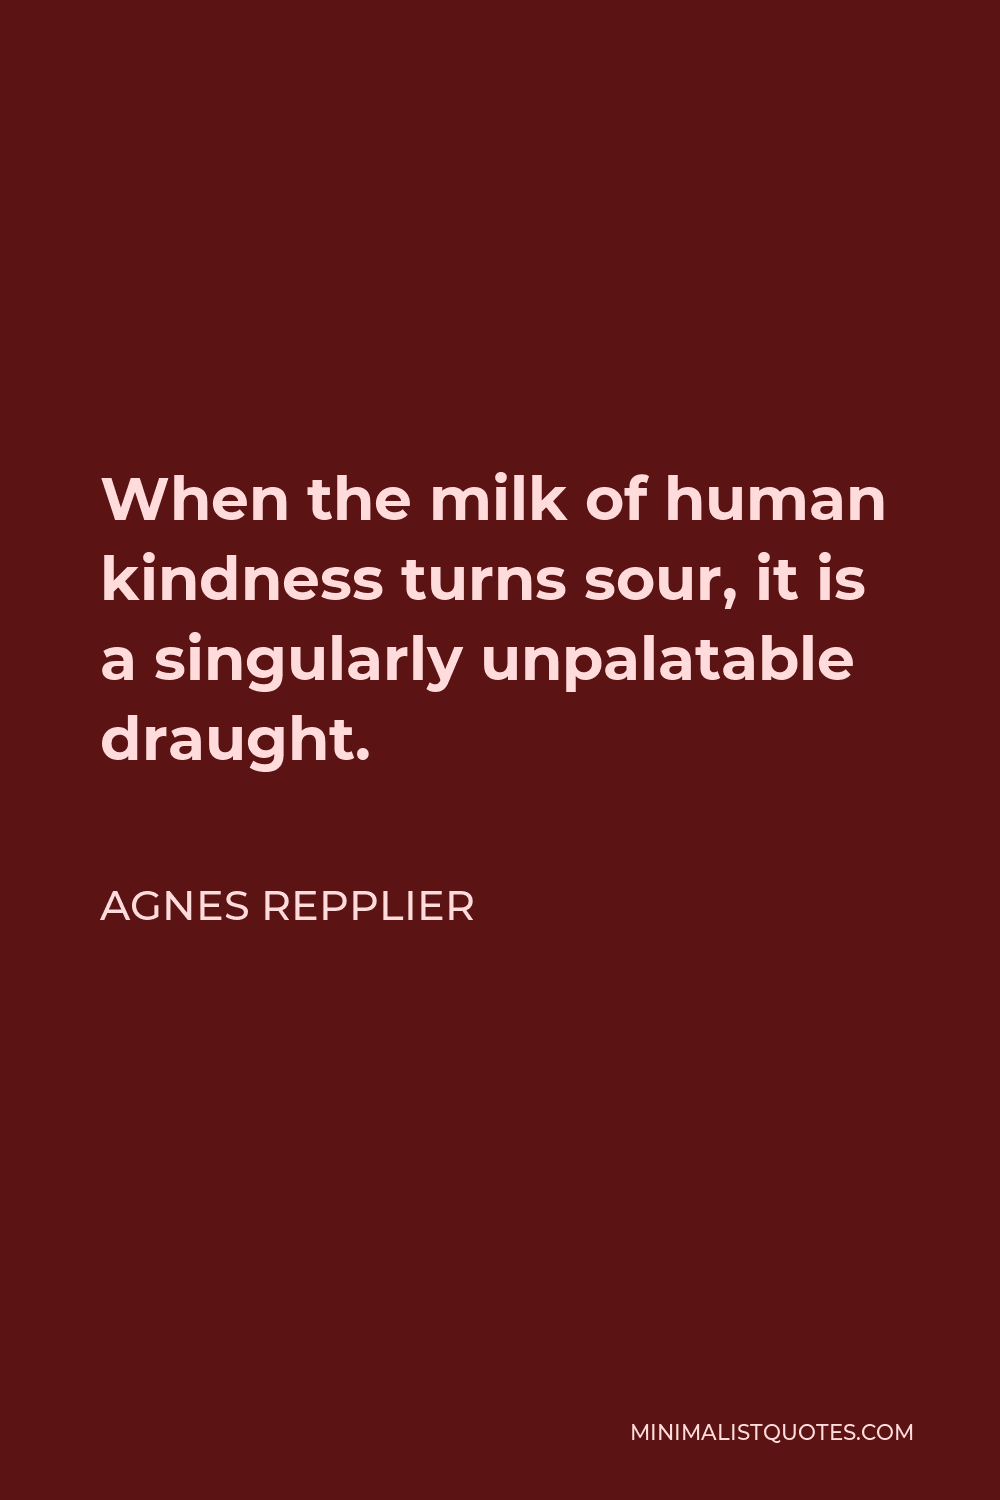 Agnes Repplier Quote - When the milk of human kindness turns sour, it is a singularly unpalatable draught.